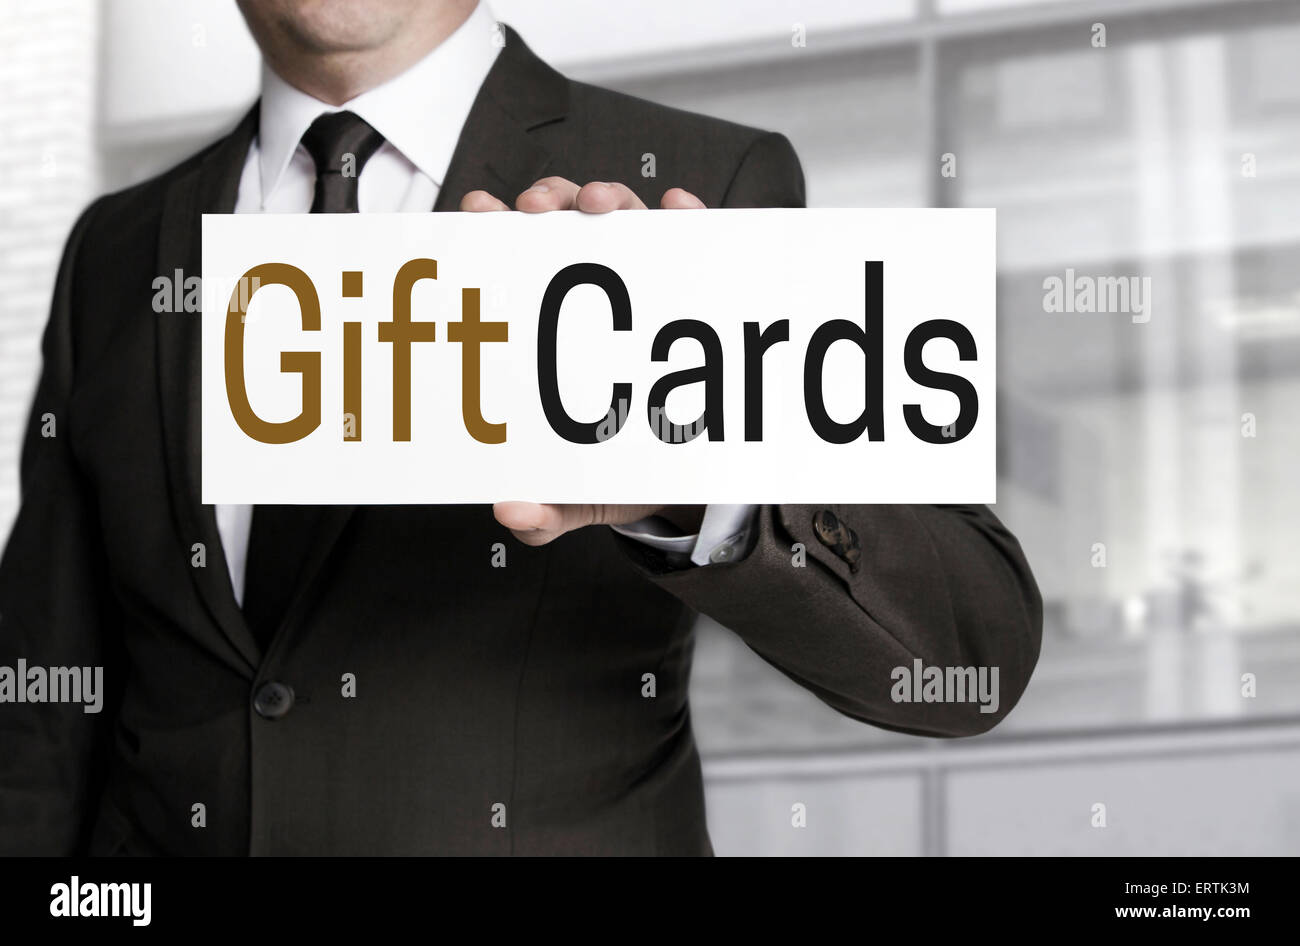 Gift Cards sign is held by businessman. Stock Photo